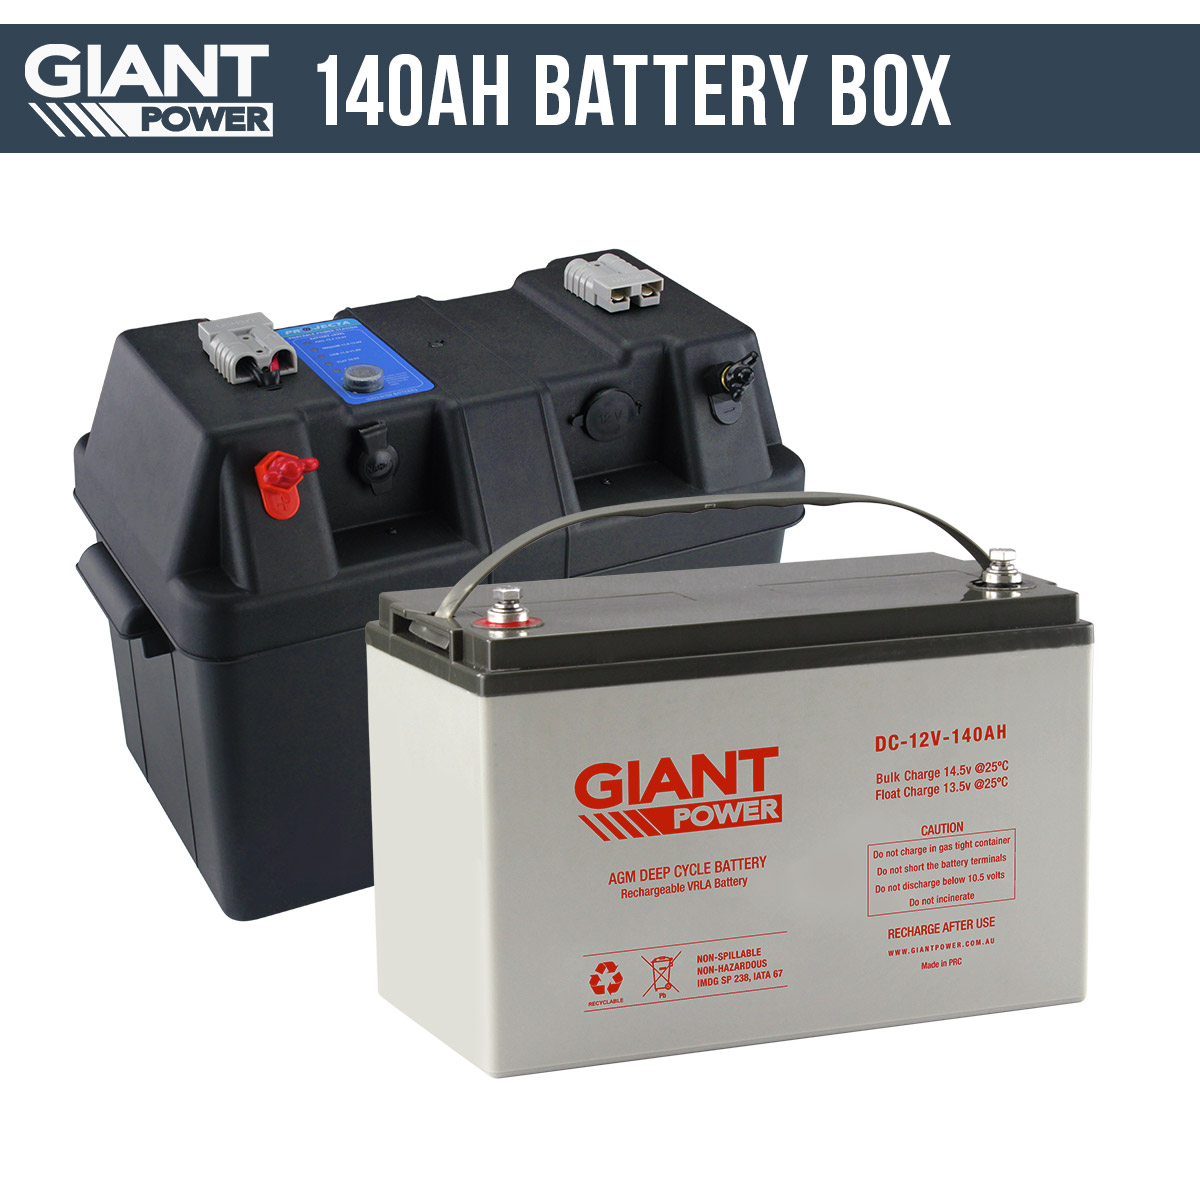 Best Battery Box for Camping